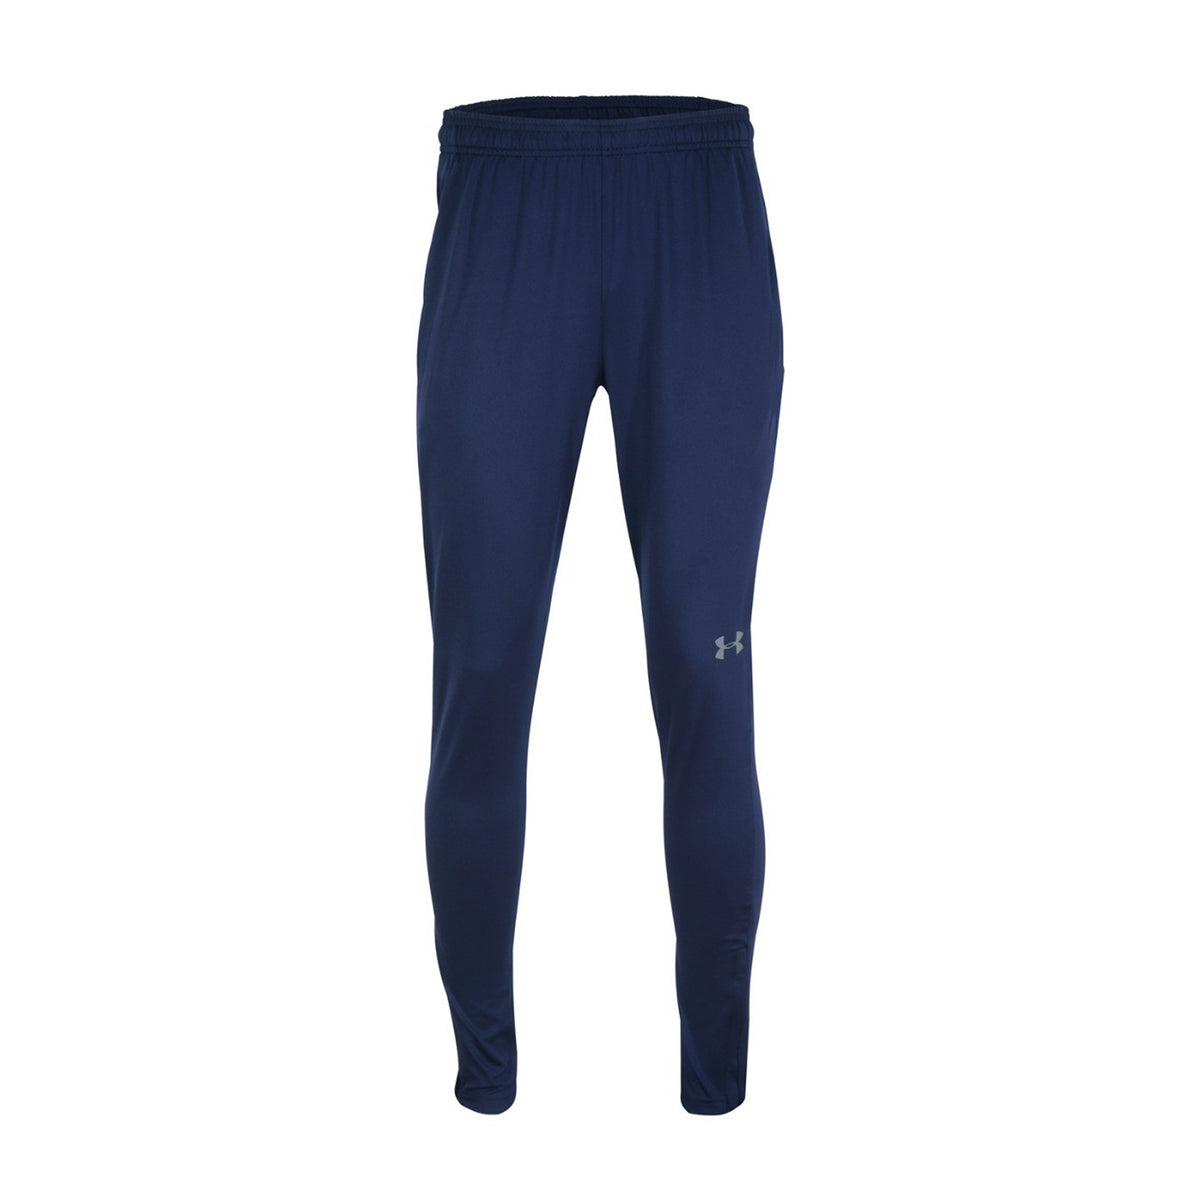 Under Armour Youth Challenger Training Pants: Navy Blue